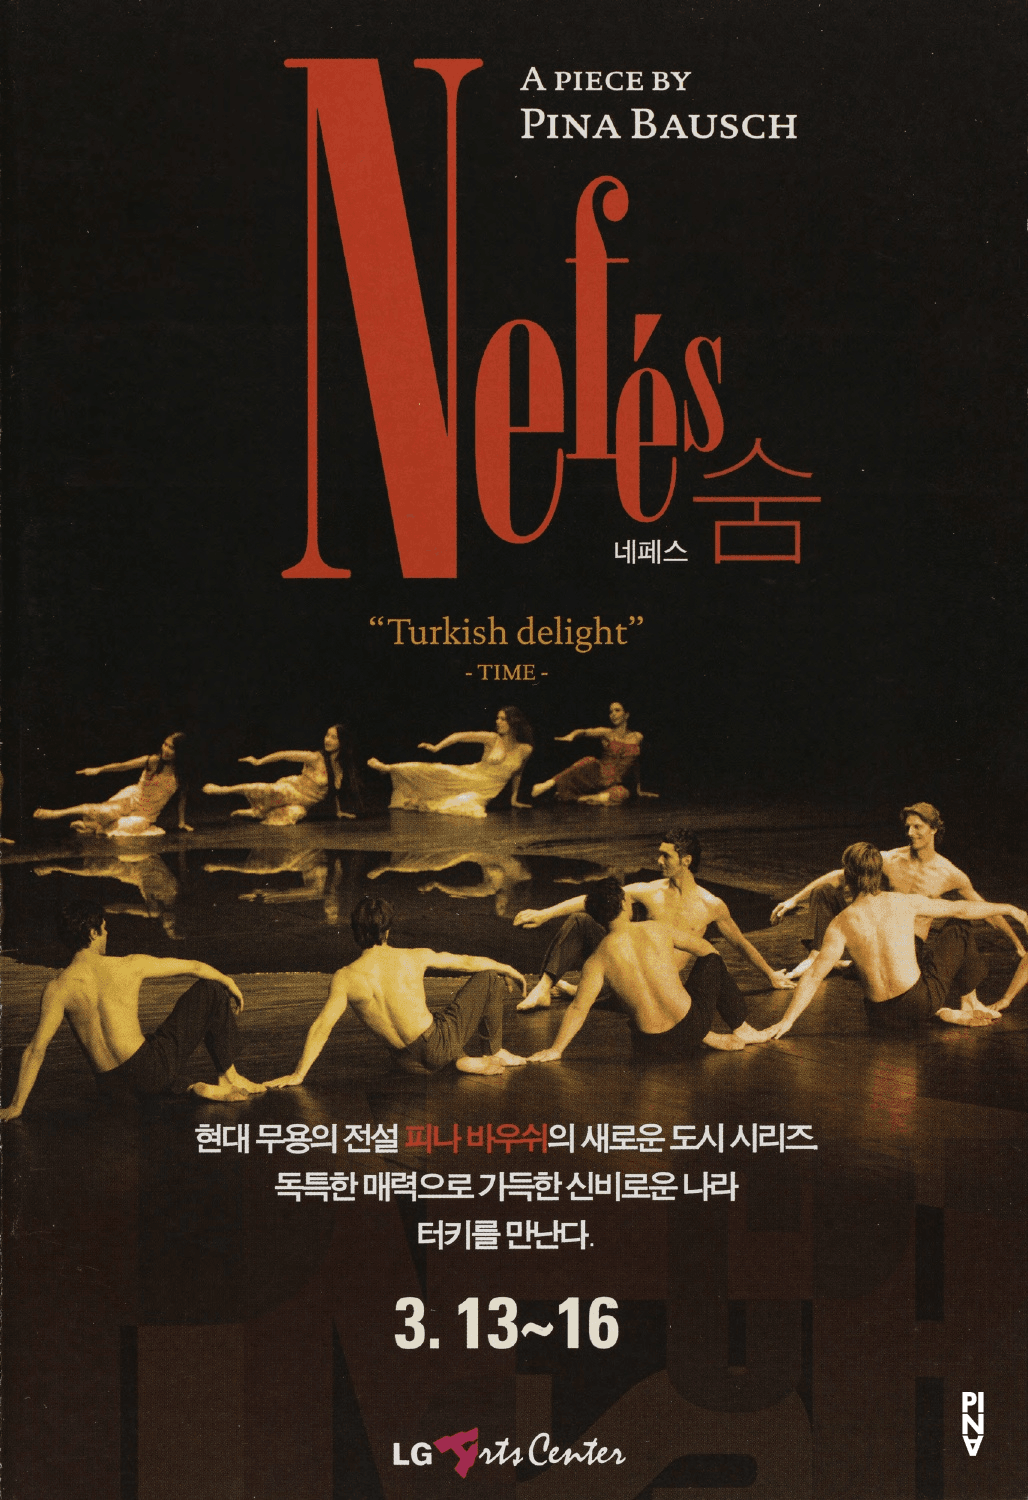 Booklet for “Nefés” by Pina Bausch with Tanztheater Wuppertal in in Seoul, 03/13/2008 – 03/16/2008